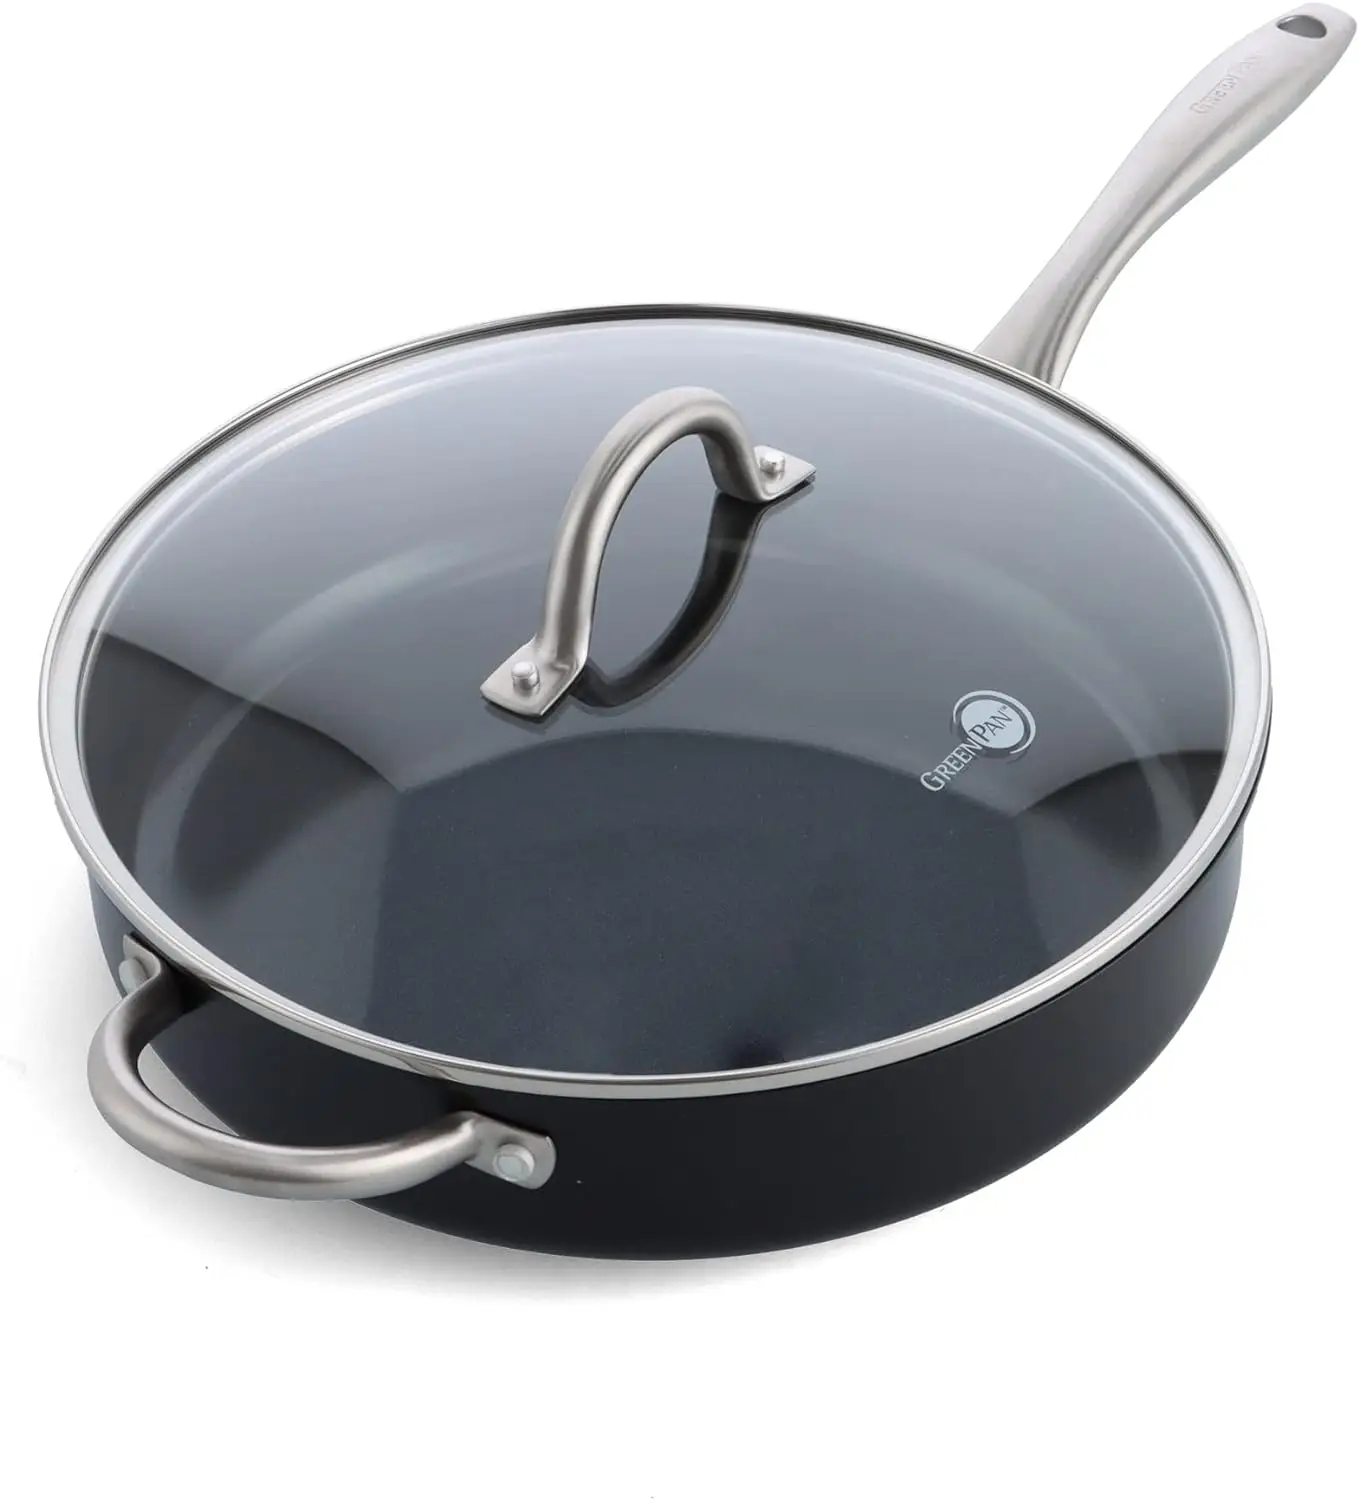 

Black Prime Midnight Hard Anodized Healthy Ceramic Nonstick, 5QT Saute Pan Jumbo Cooker with Helper Handle and Lid, PFAS-Free, D